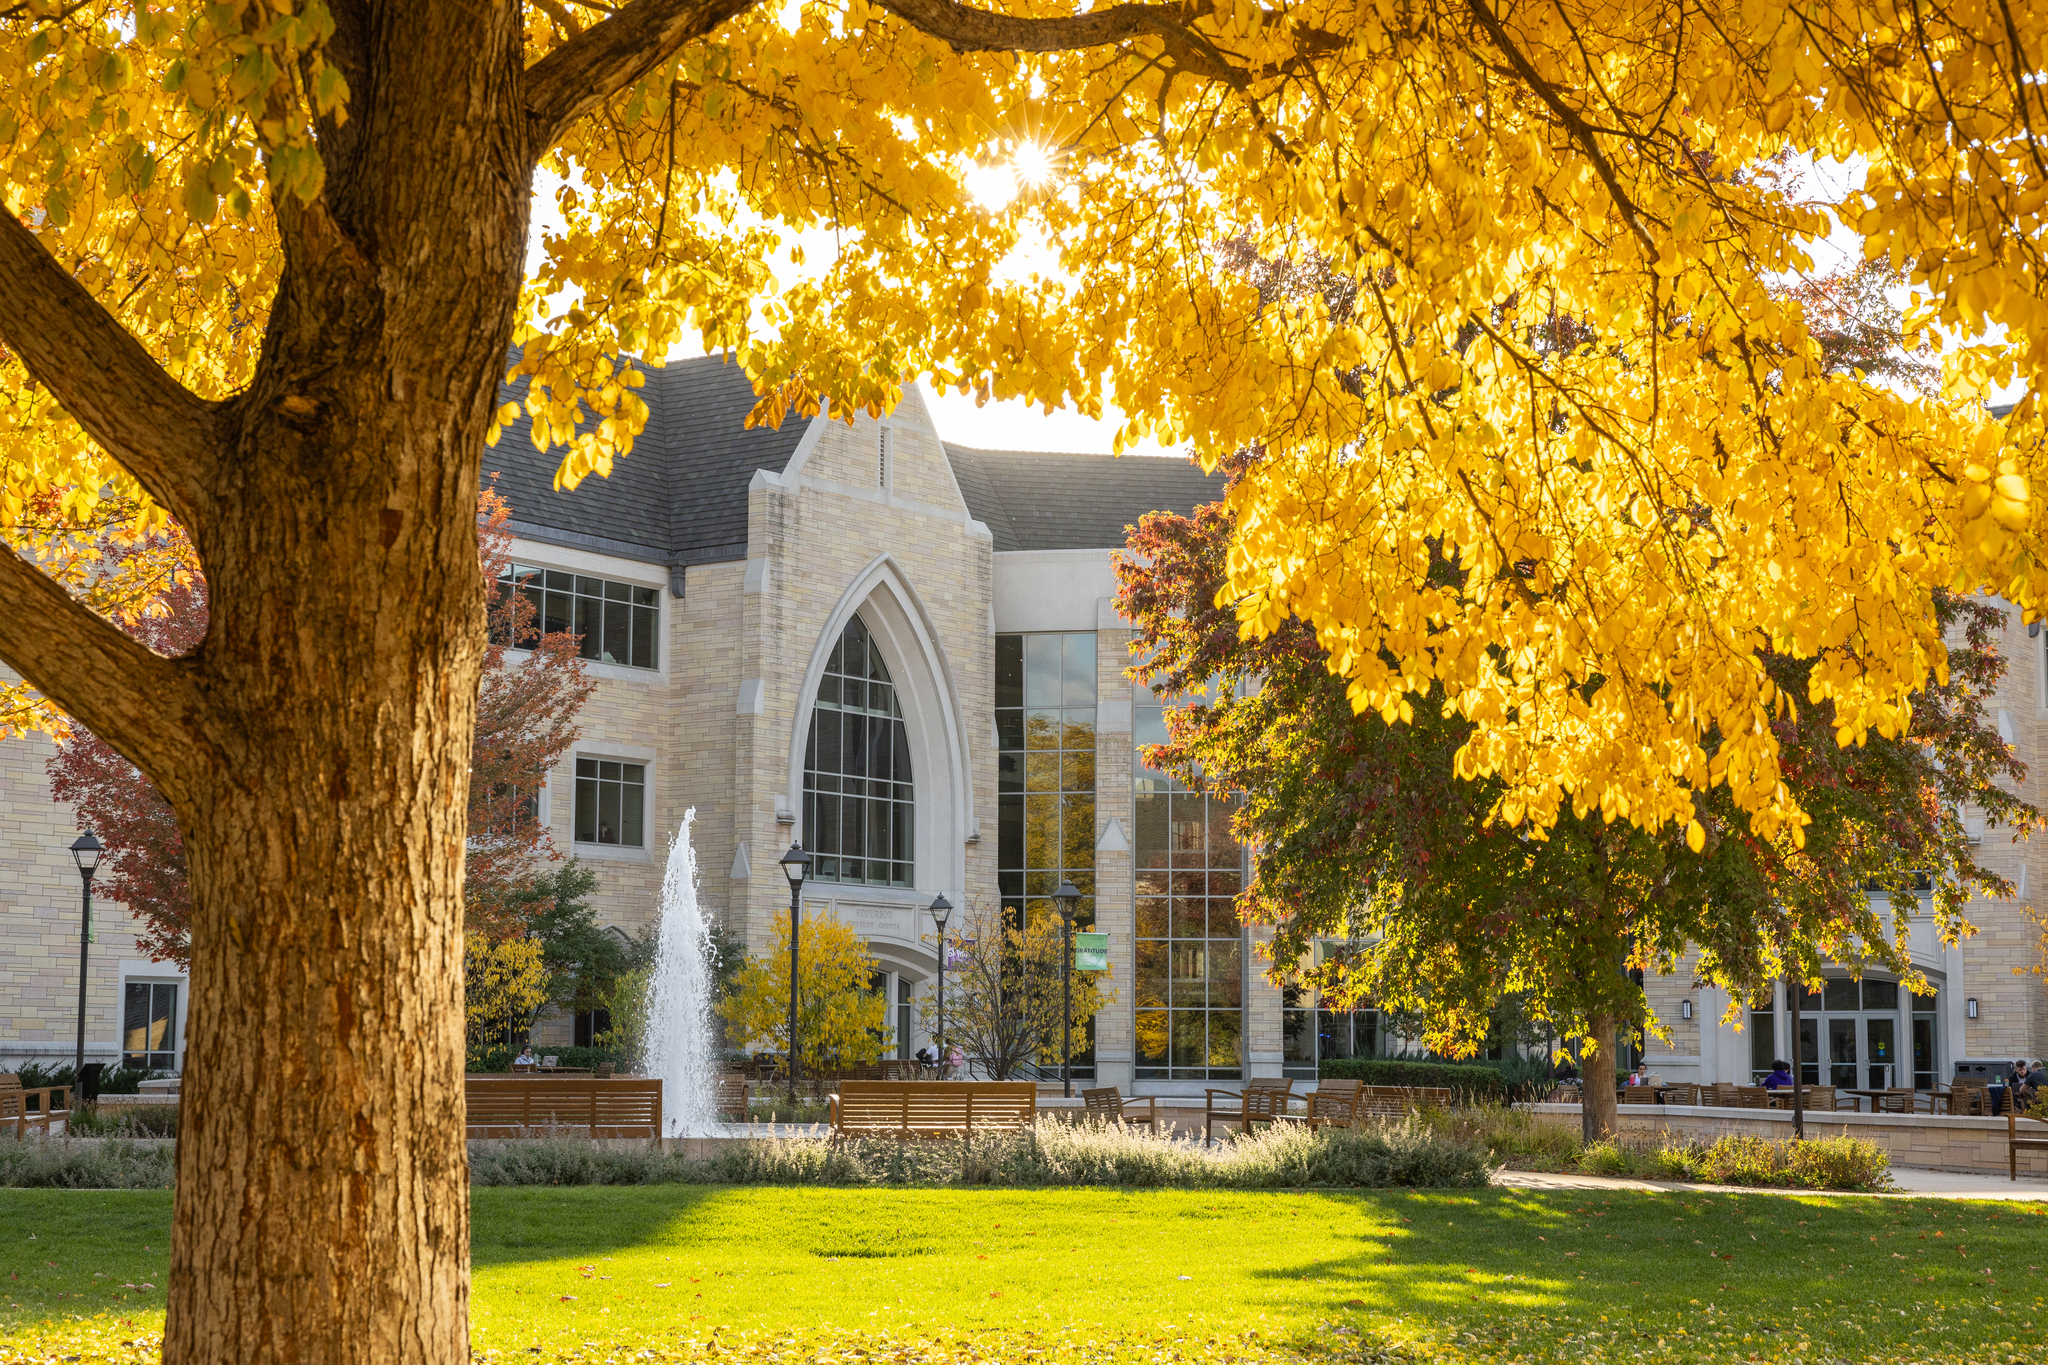 Trees with vivid colorful leaves across the St. Paul campus on a beautiful fall day